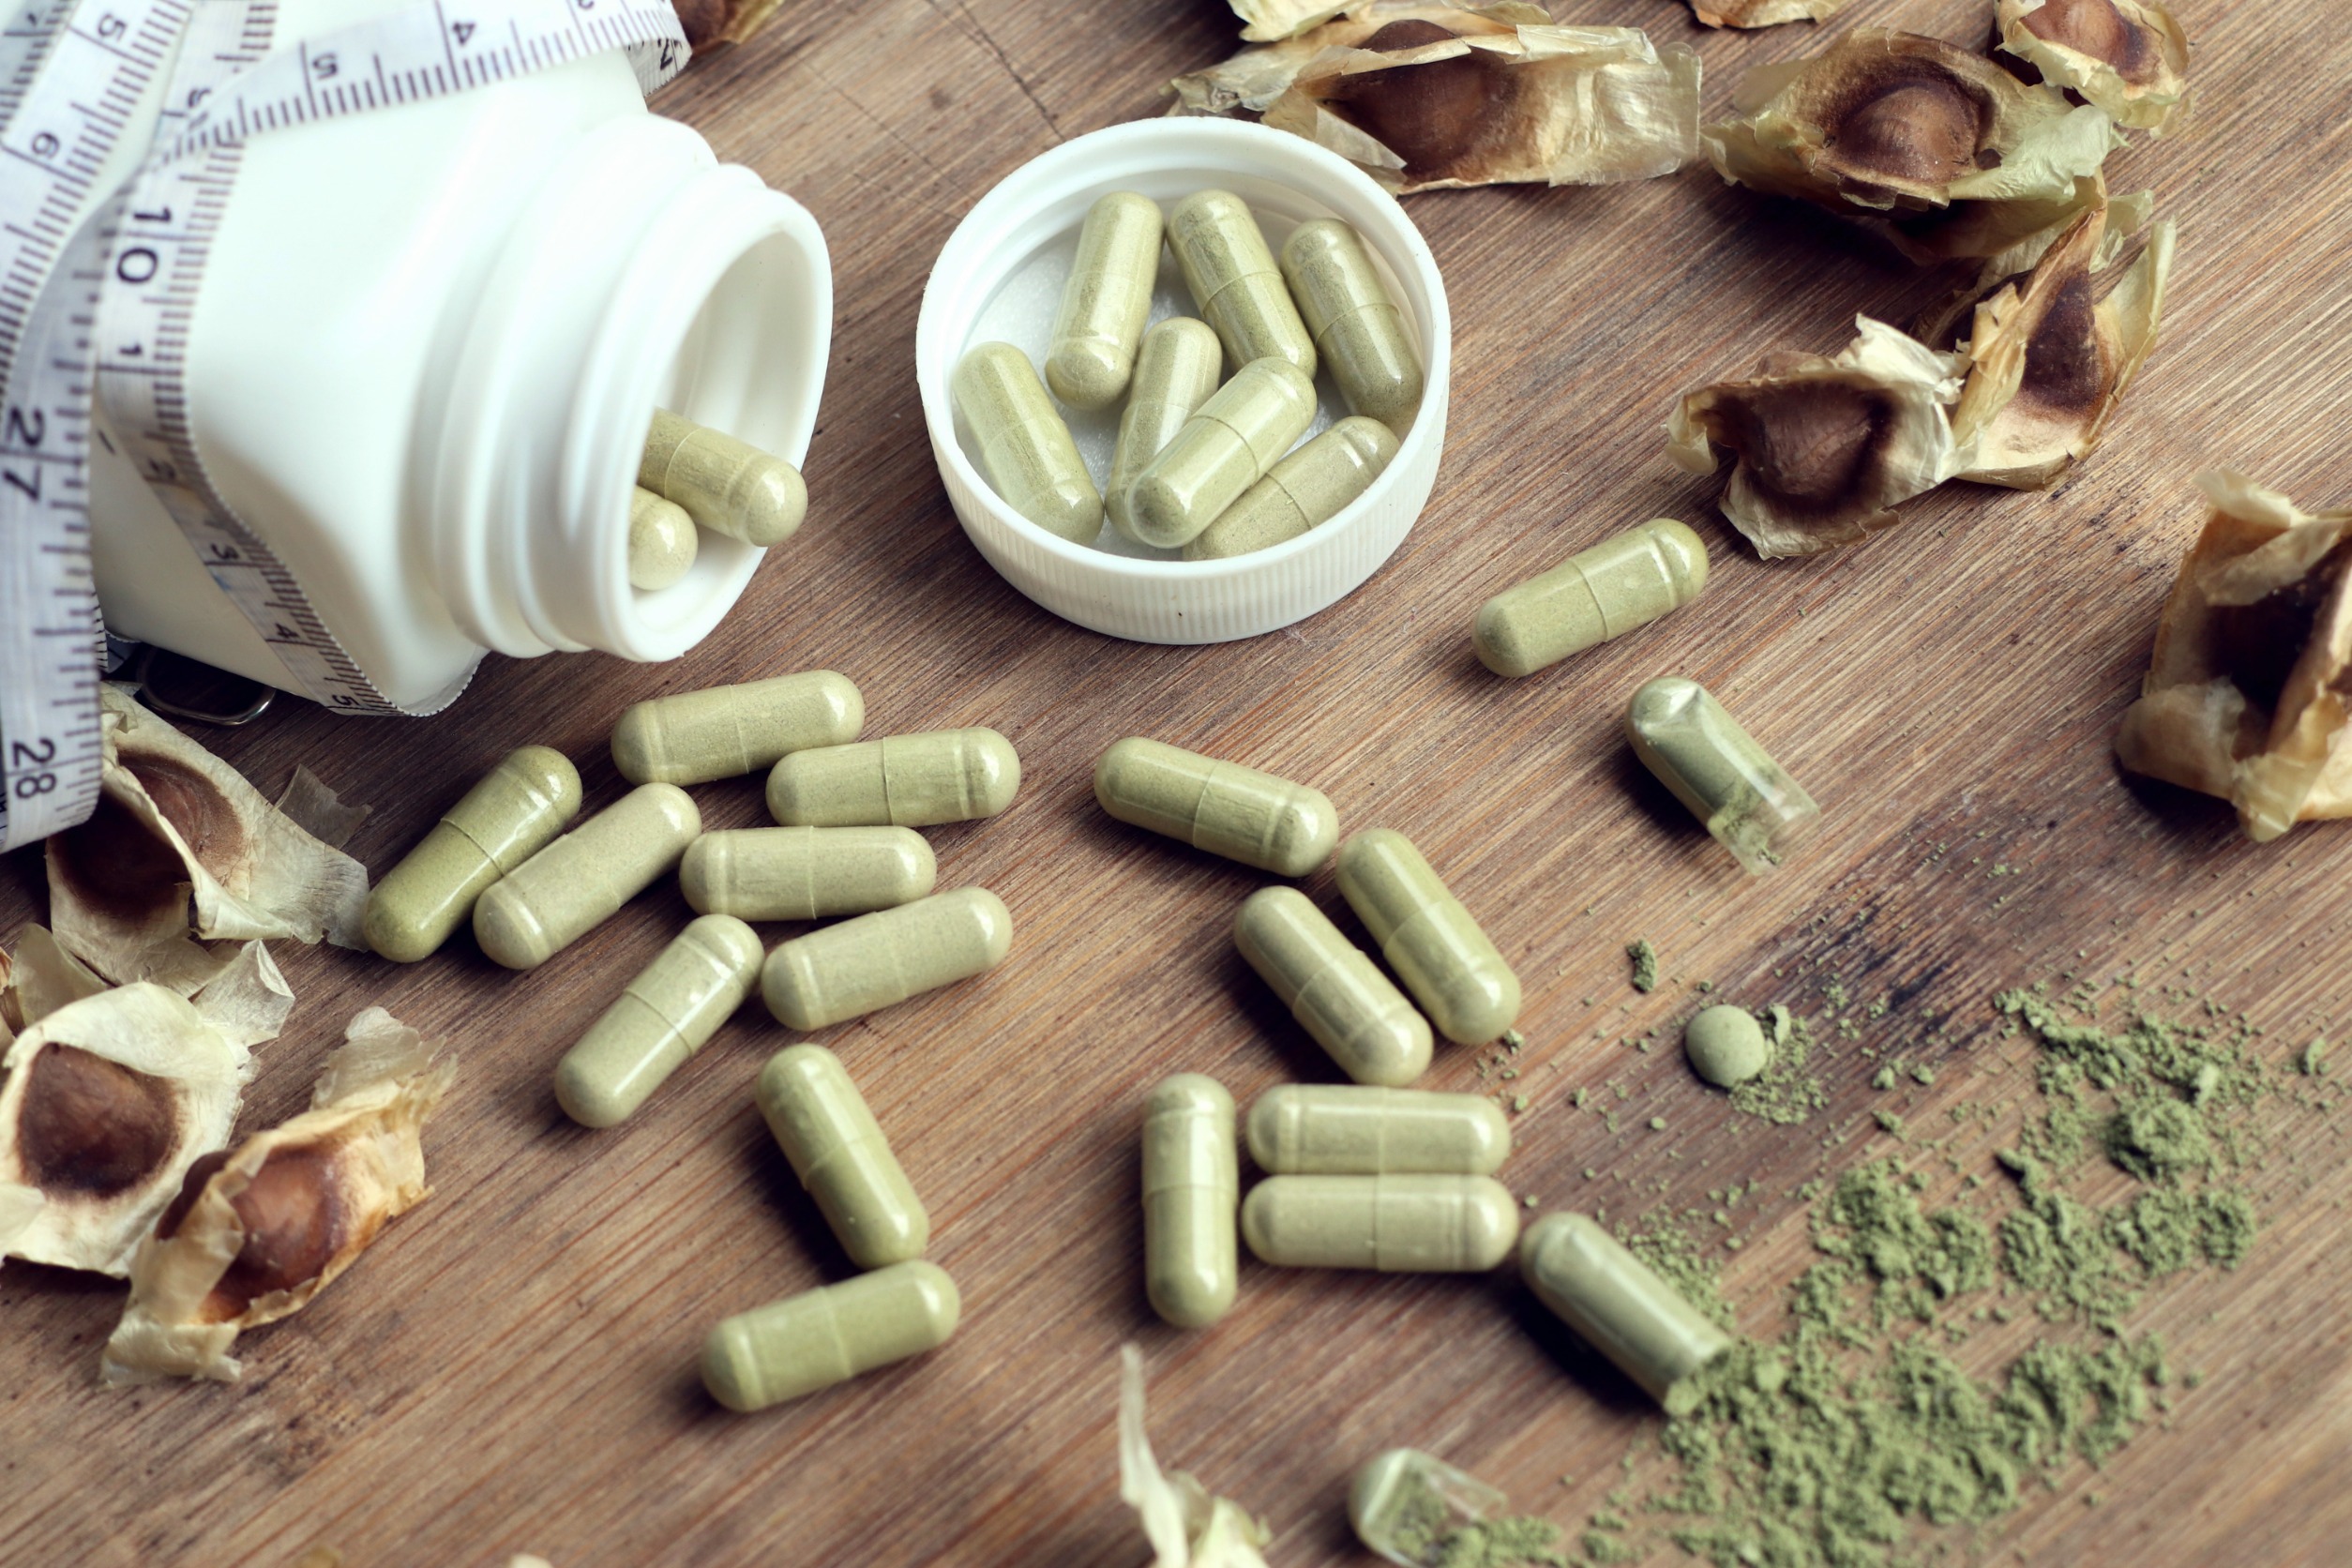 Herbal Weight Loss Supplements